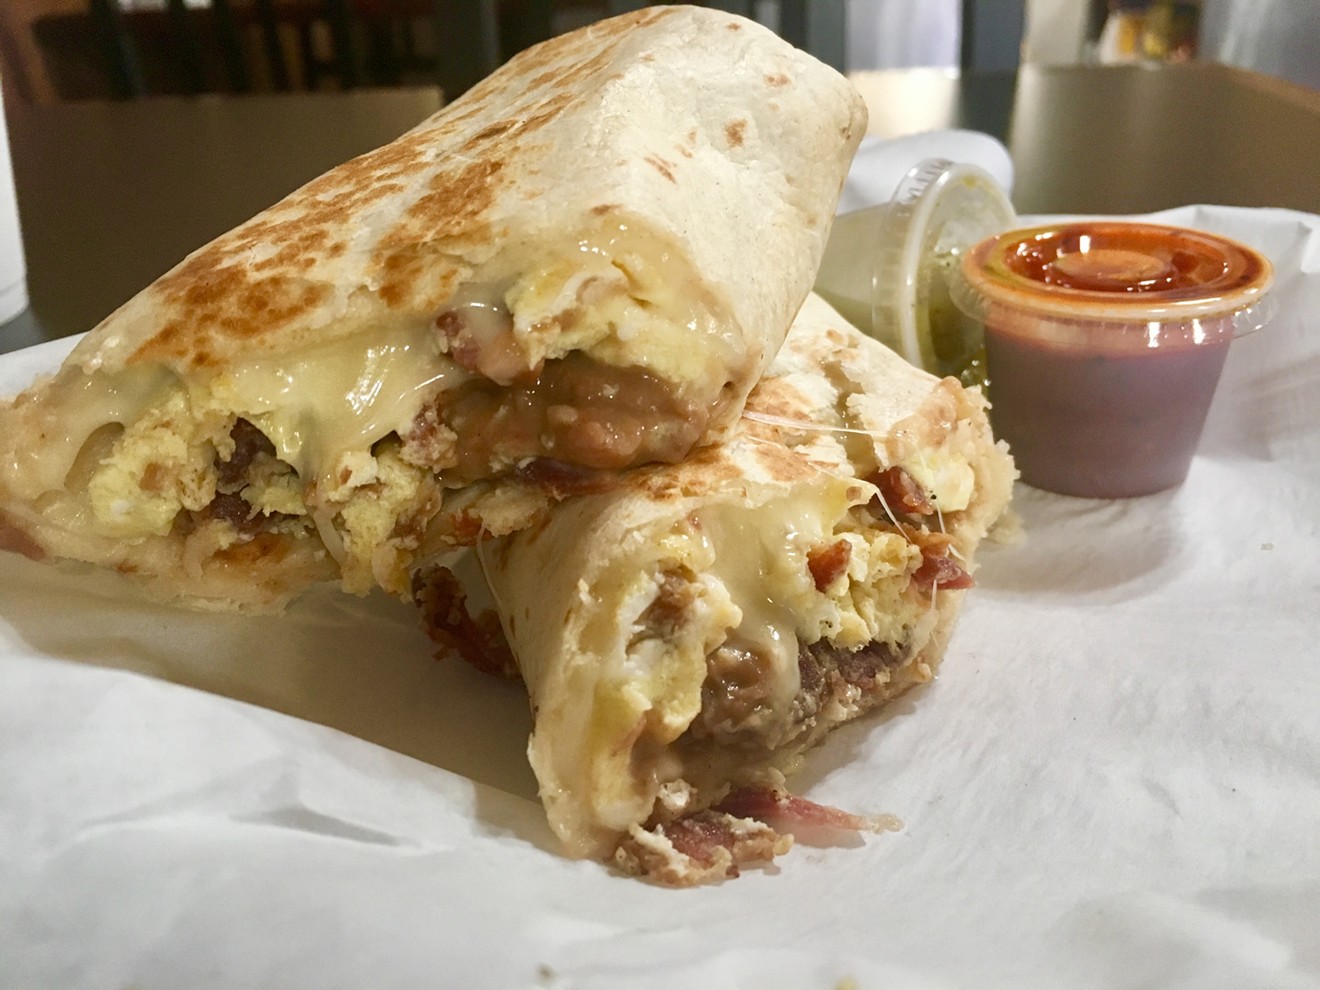 A bacon, egg and cheese breakfast burrito with beans and salsa at Cookie's.